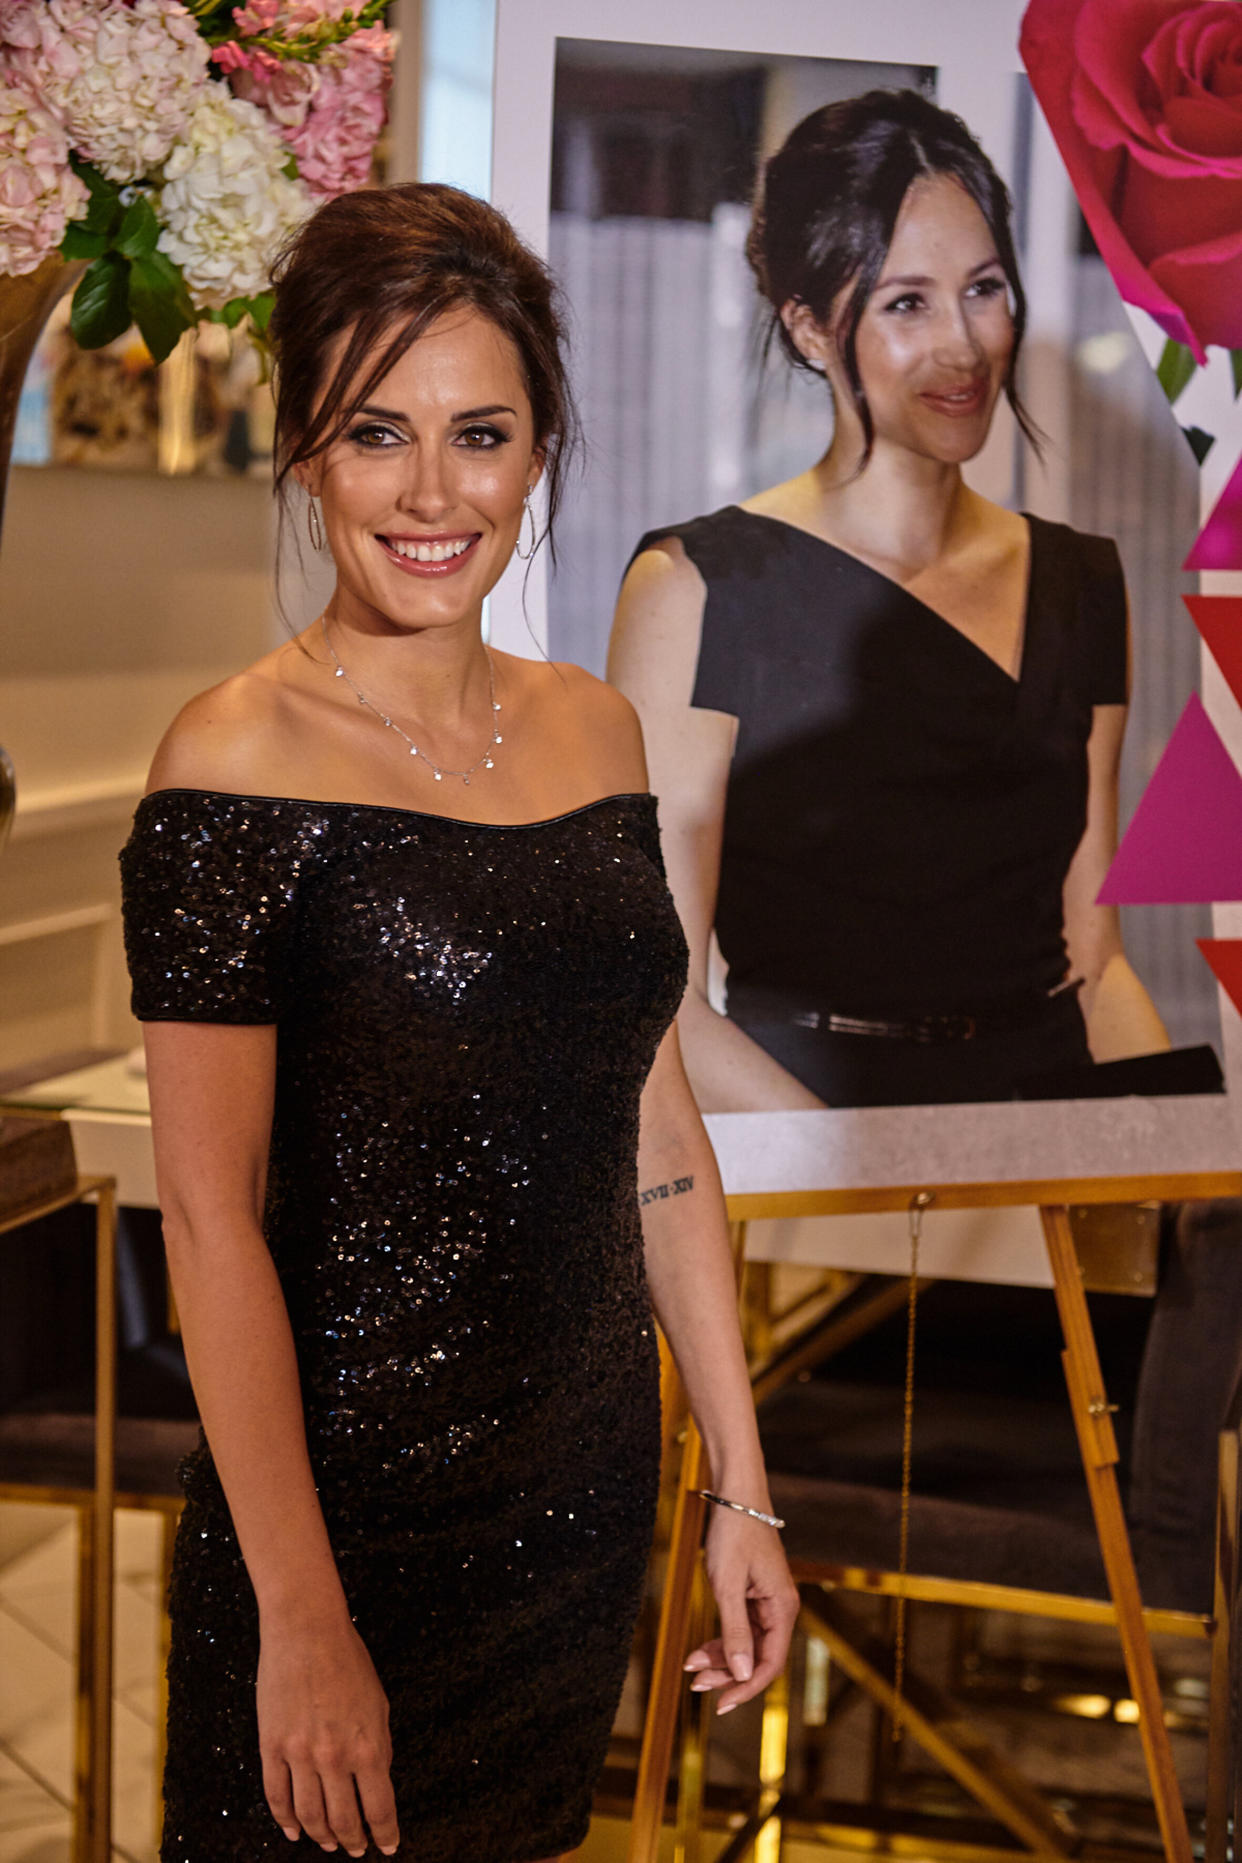 Tanya at her unveiling event revealing her likeness to Meghan Markle. Photo: Caters News